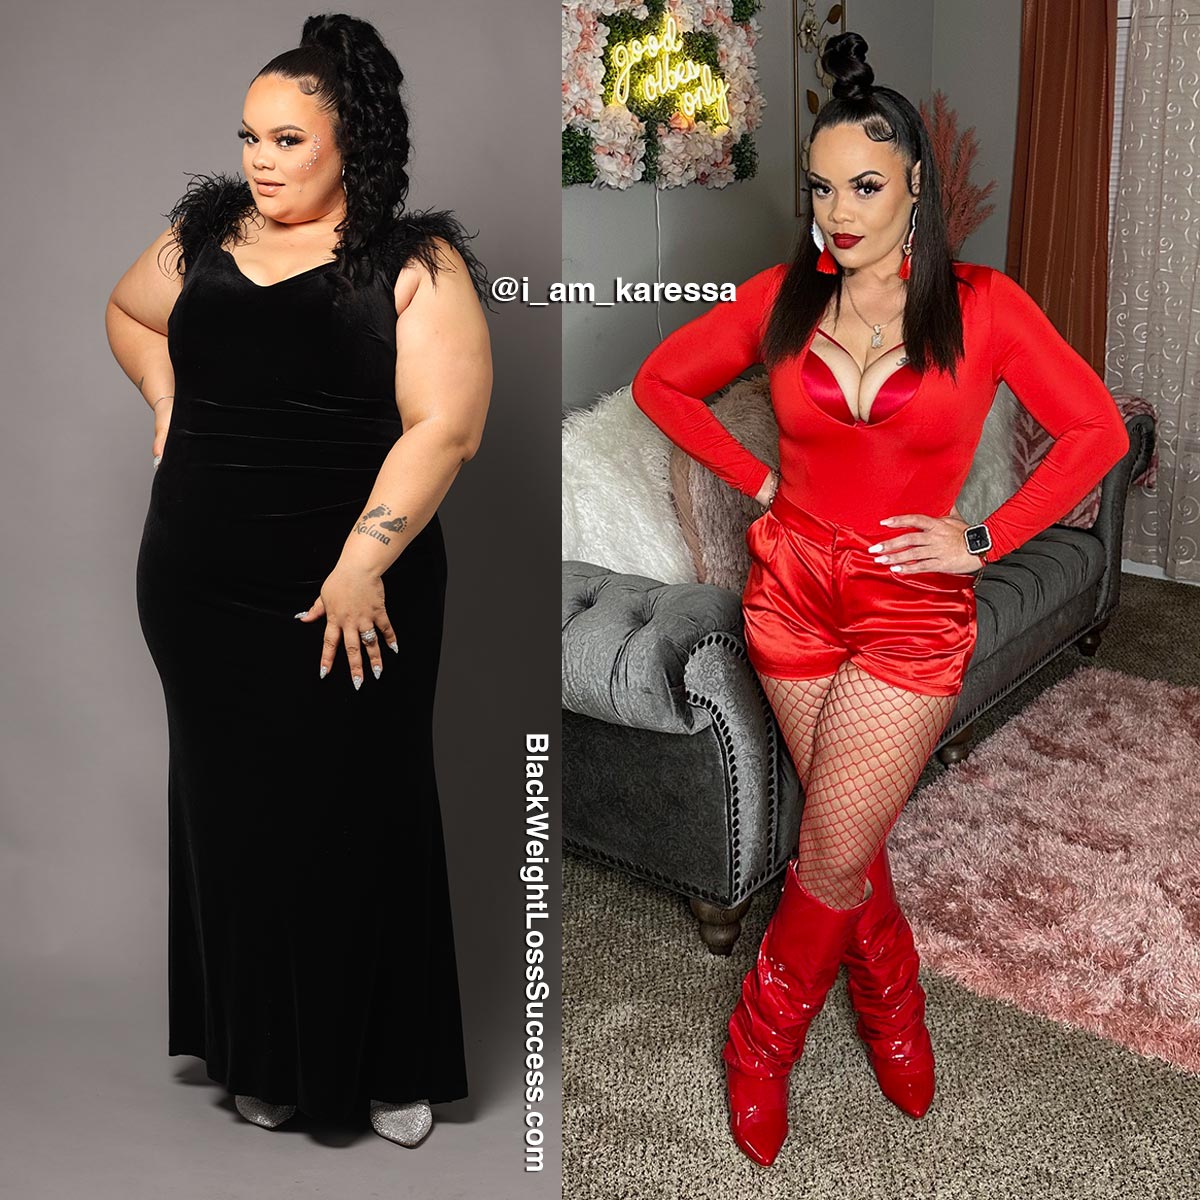 Karessa before and after weight loss